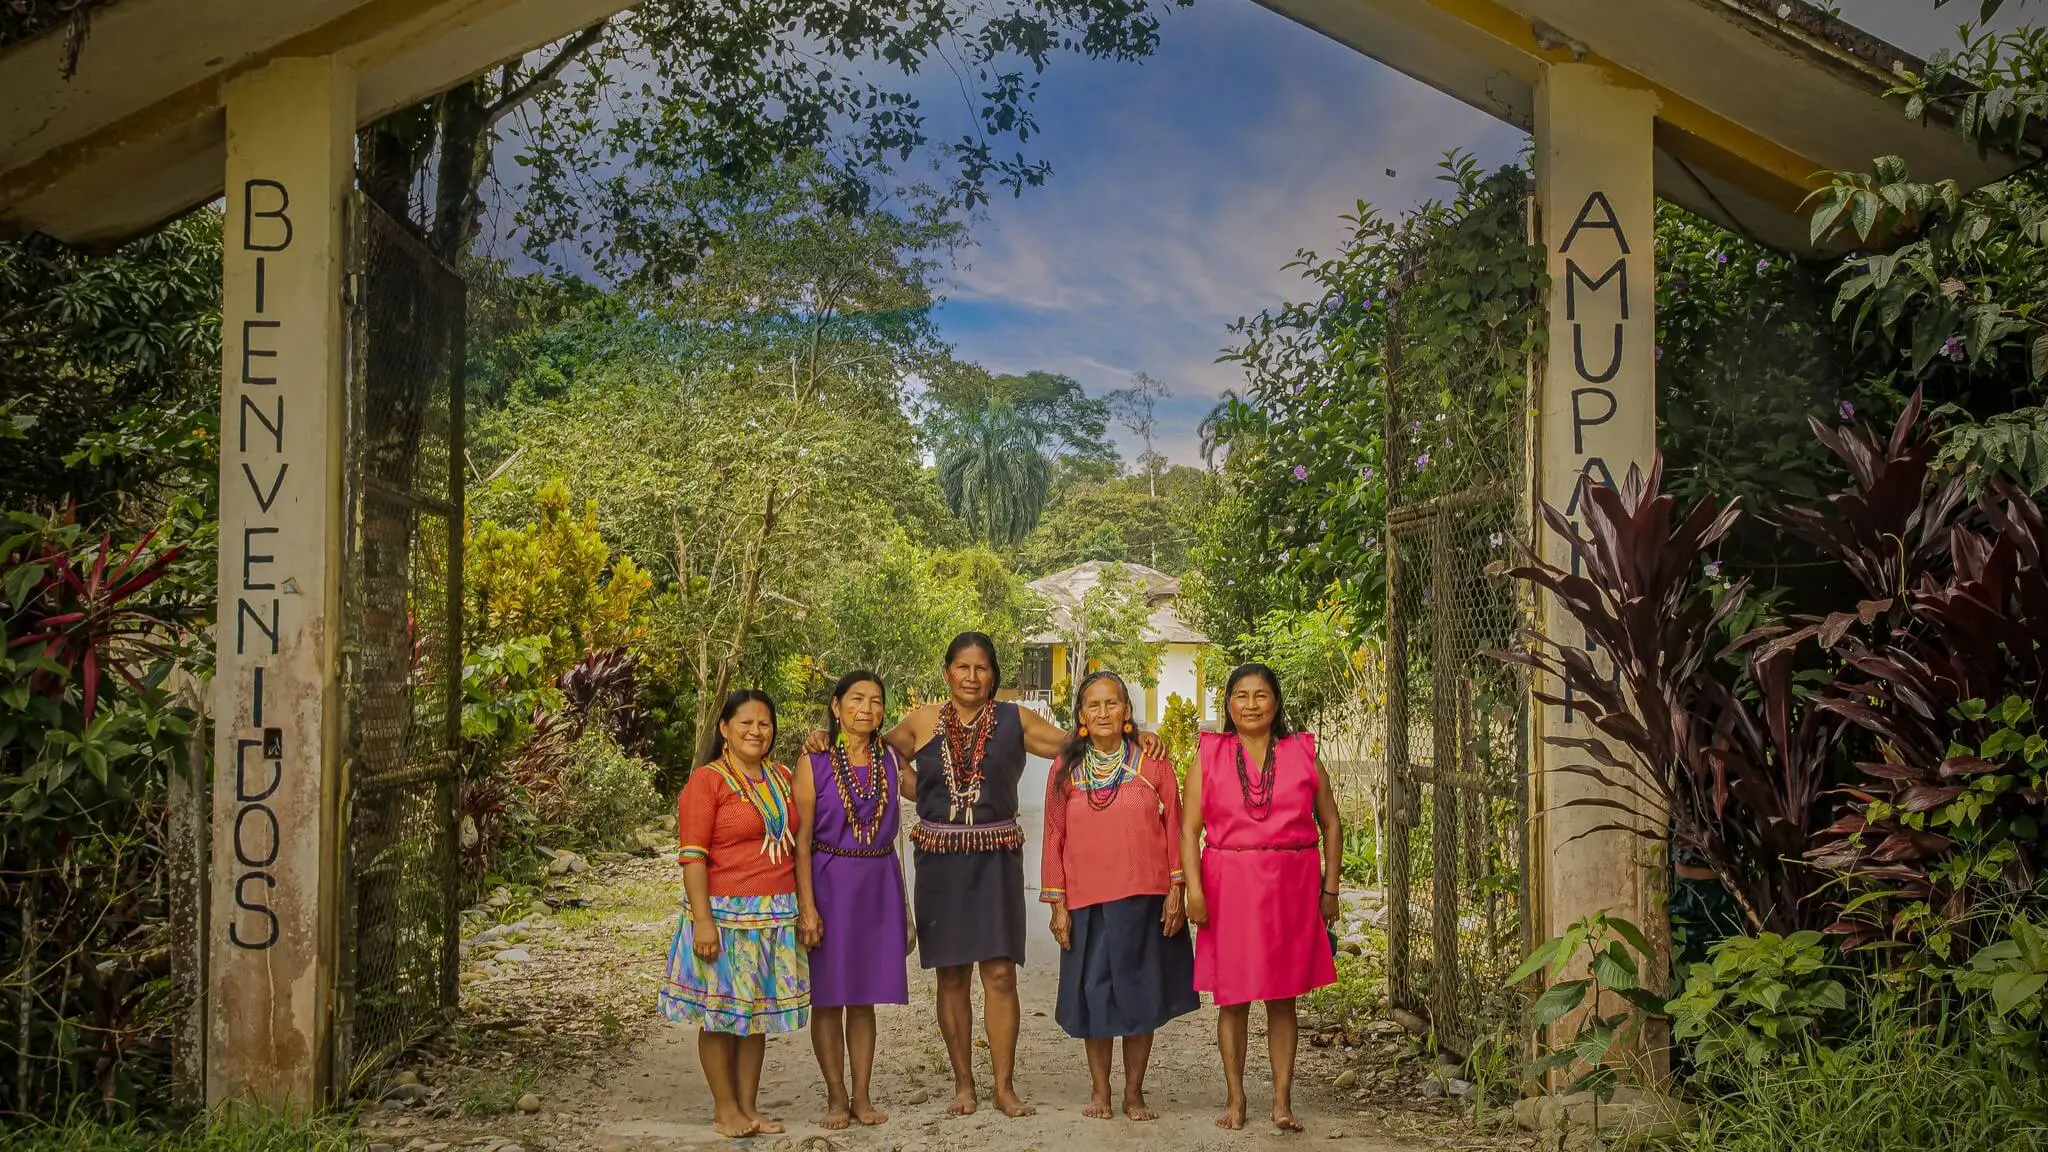 The achimamas, midwives, welcoming visitors to their Amupakin center to teach and share their wisdom about childbirth with ancient techniques and medicinal plants. | Impactful Travel in Ecuador